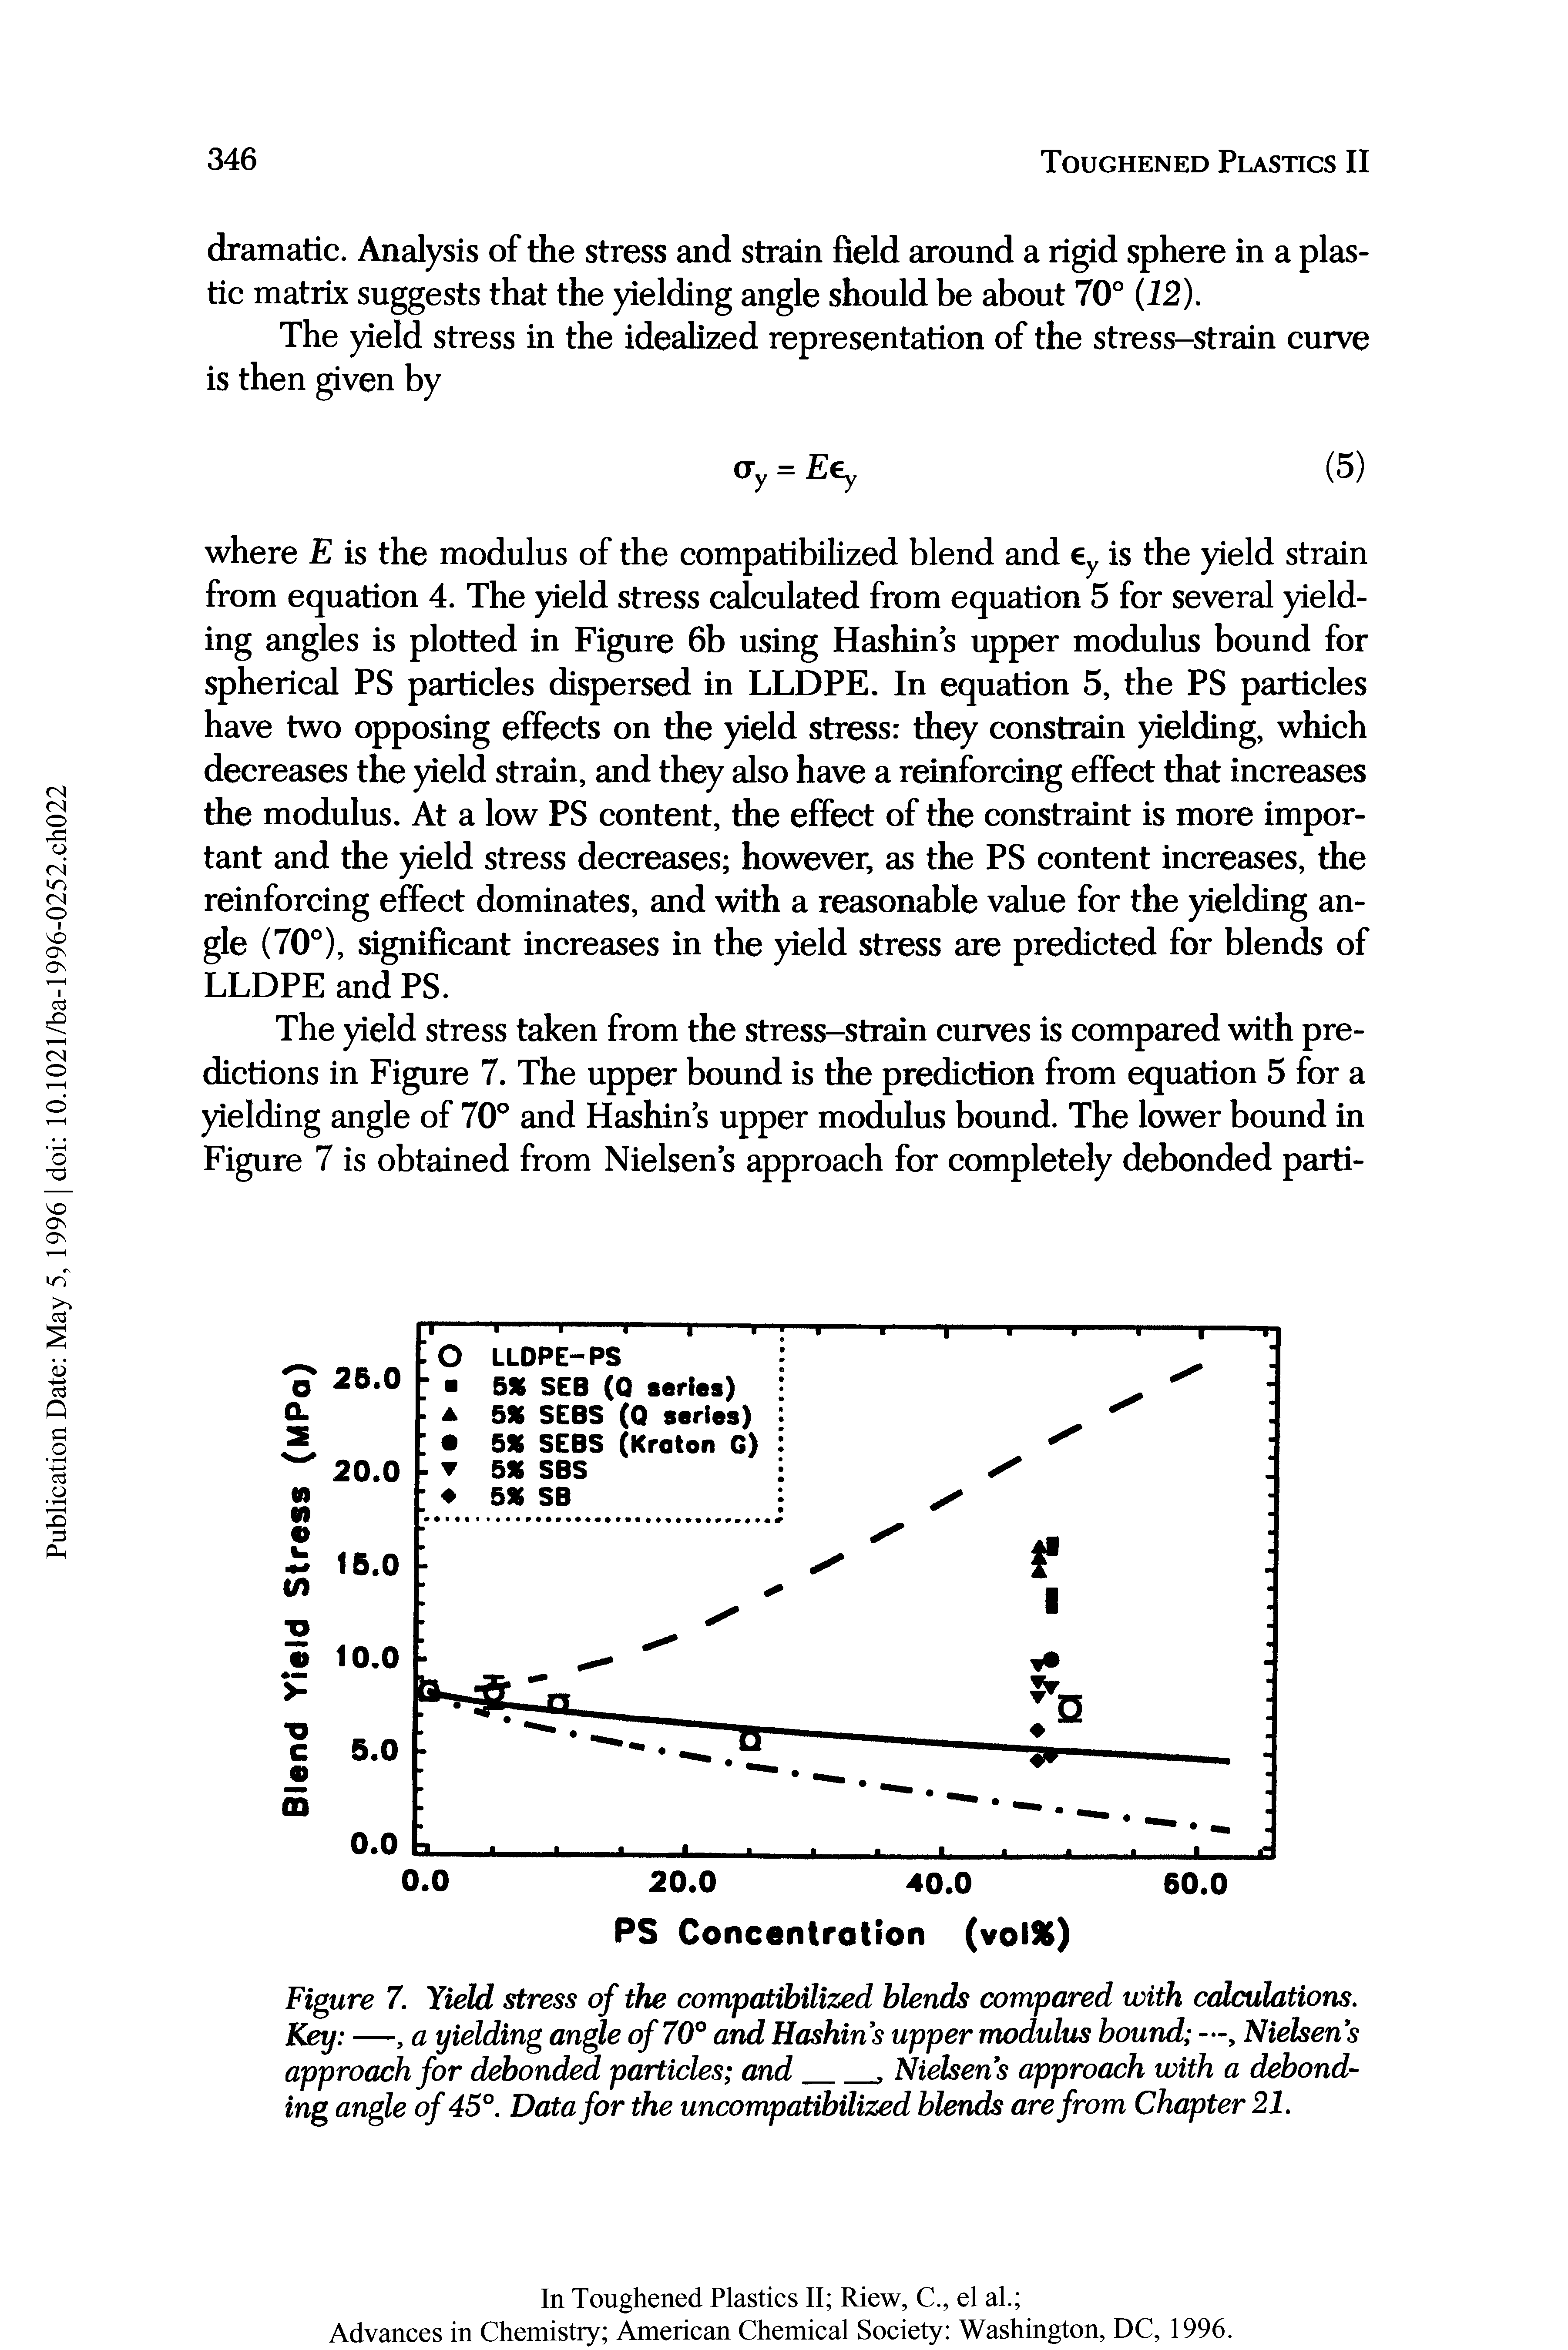 Figure 7. Yield stress of the compatibilized blends compared with calculations. Key —, a yielding angle of 70° and Hashins upper modulus bound —, Nielsens approach for debonded particles and, Nielsens approach with a debond-...